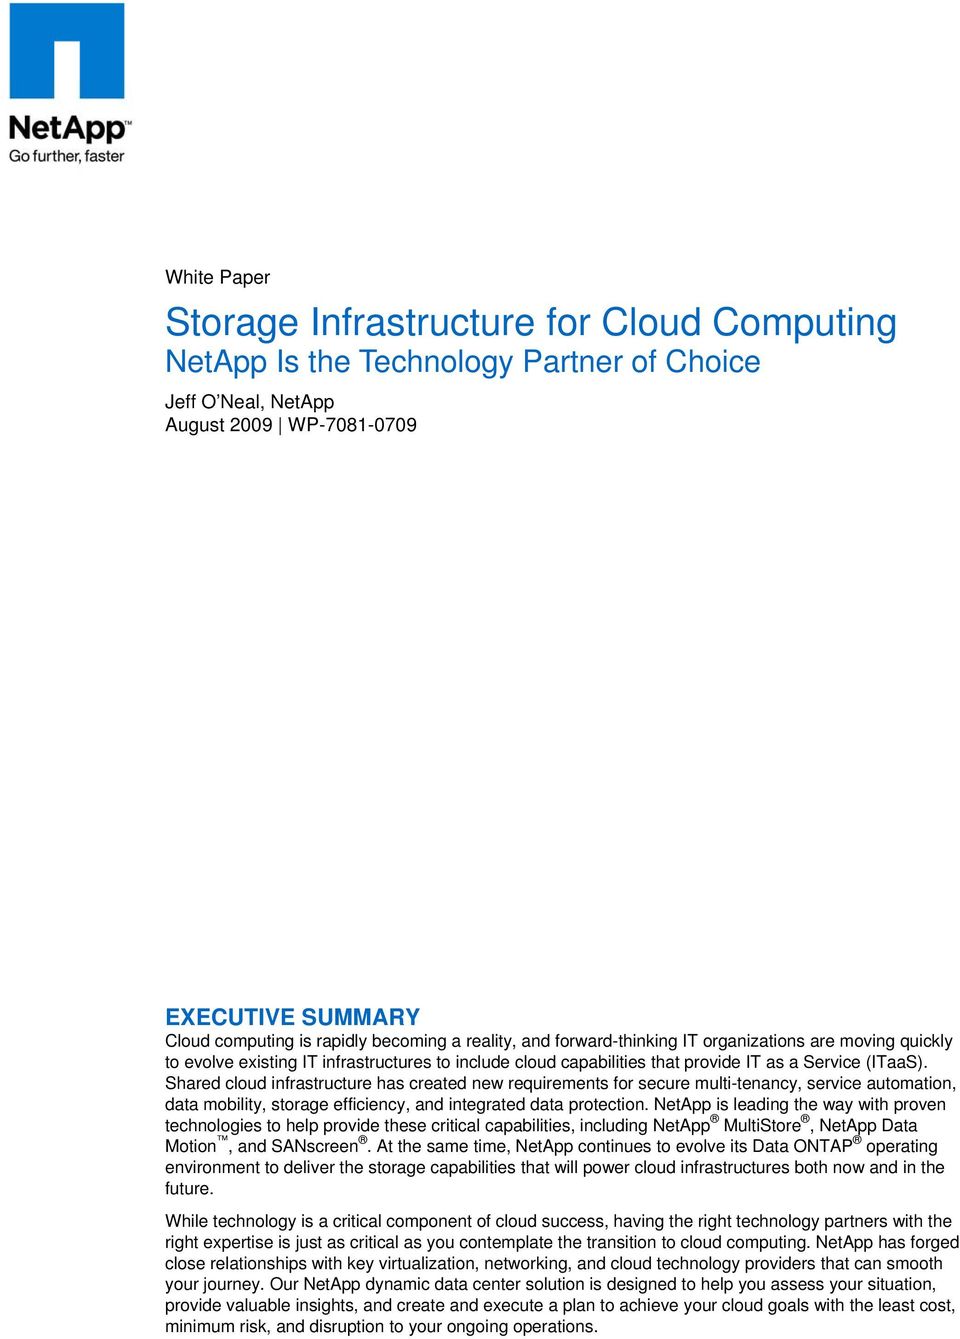 Shared cloud infrastructure has created new requirements for secure multi-tenancy, service automation, data mobility, storage efficiency, and integrated data protection.